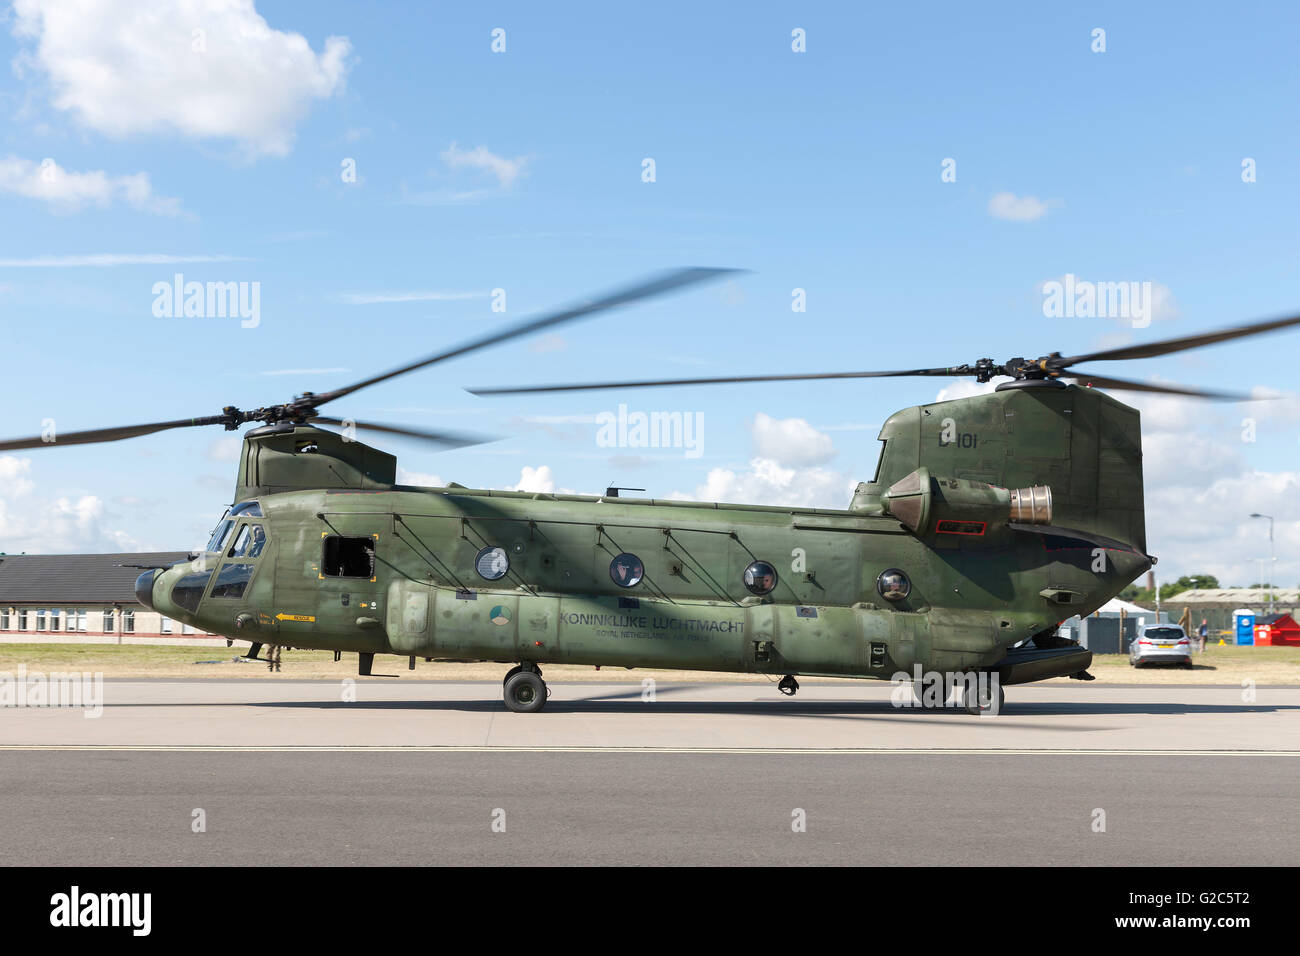 Royal Netherlands Air Force Boeing CH-47D Chinook Military transport Helicopter D-101 from 298 Squadron based at Gilze Rijen. Stock Photo